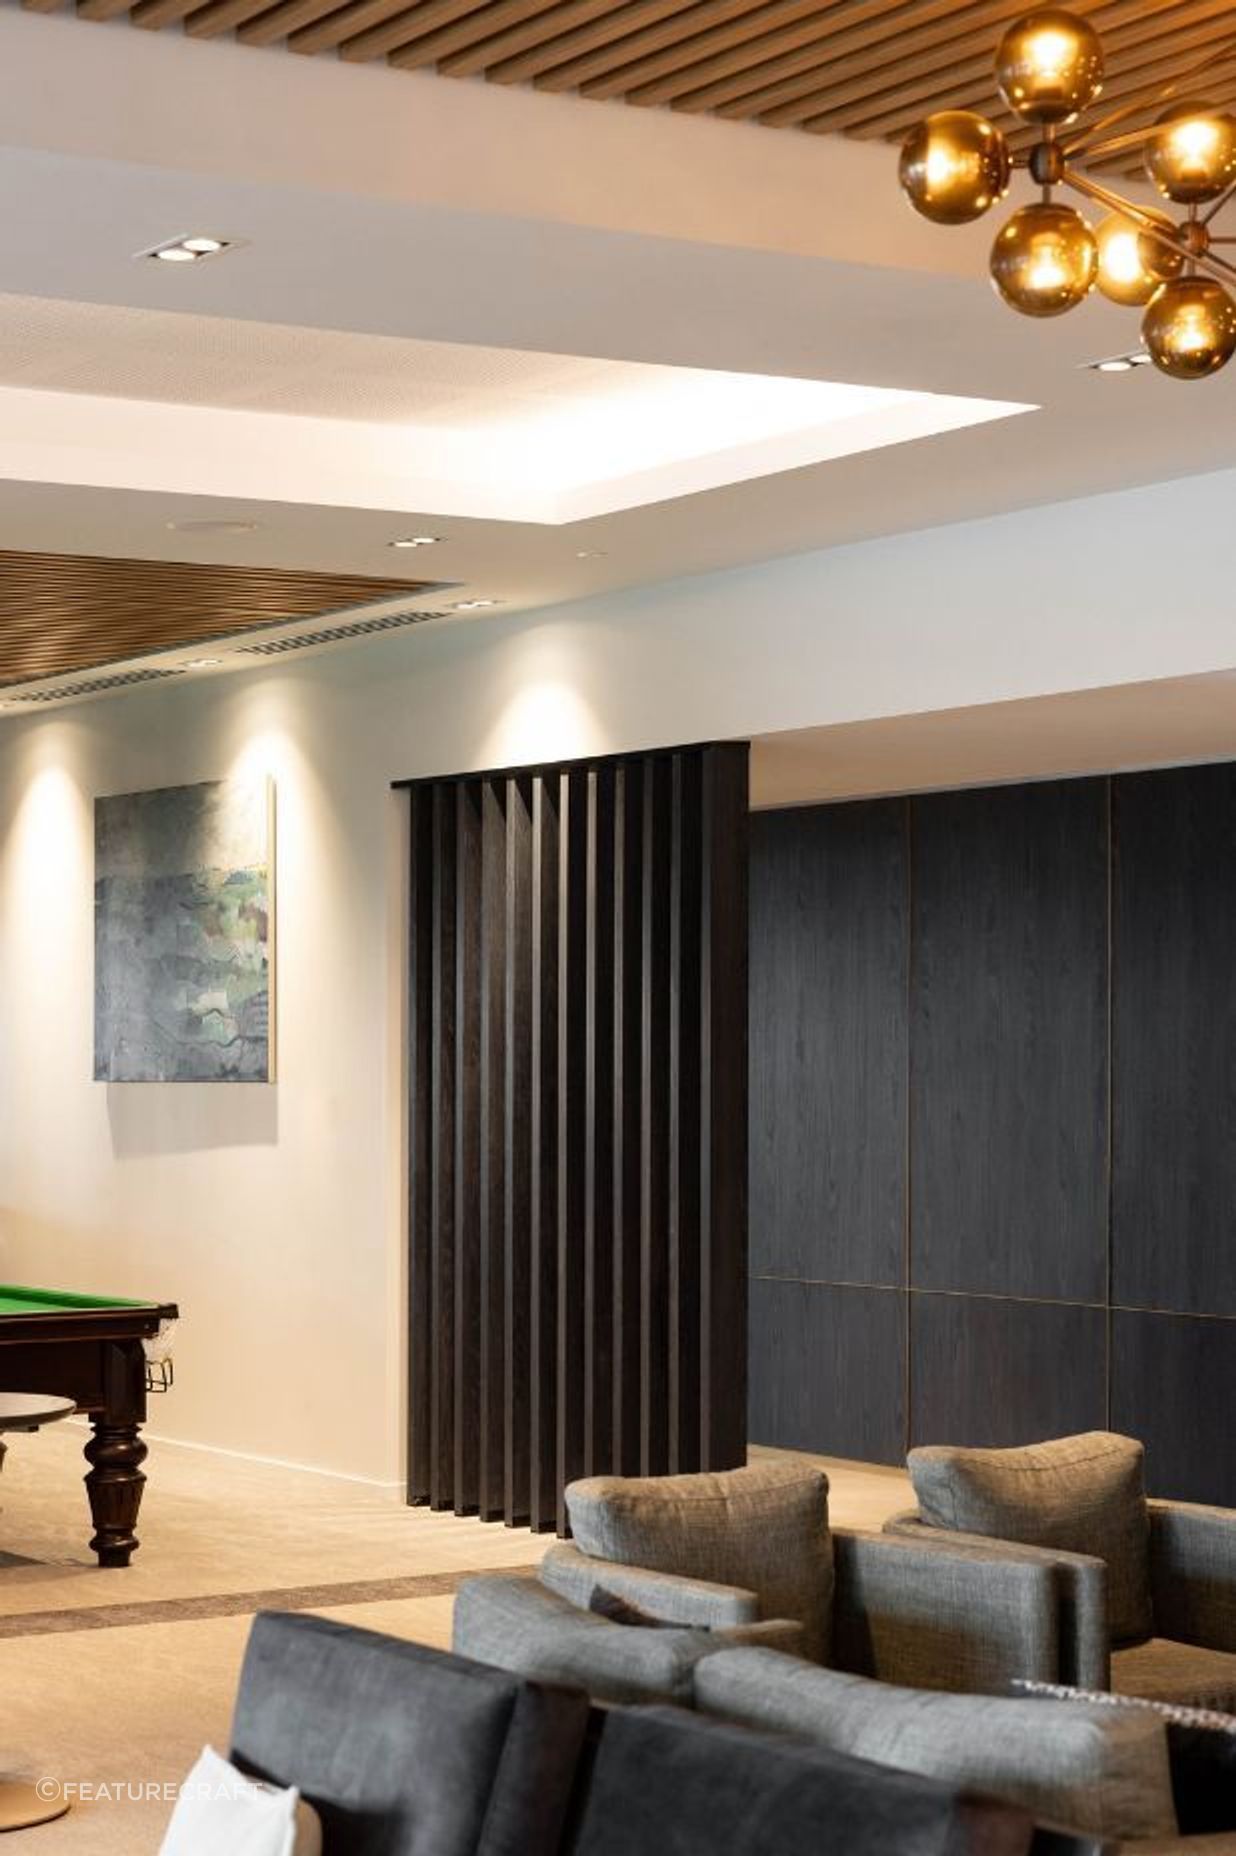 The MDF panels were finished with black pine veneer and elevated with a custom brass trim, evoking a sense of elegance